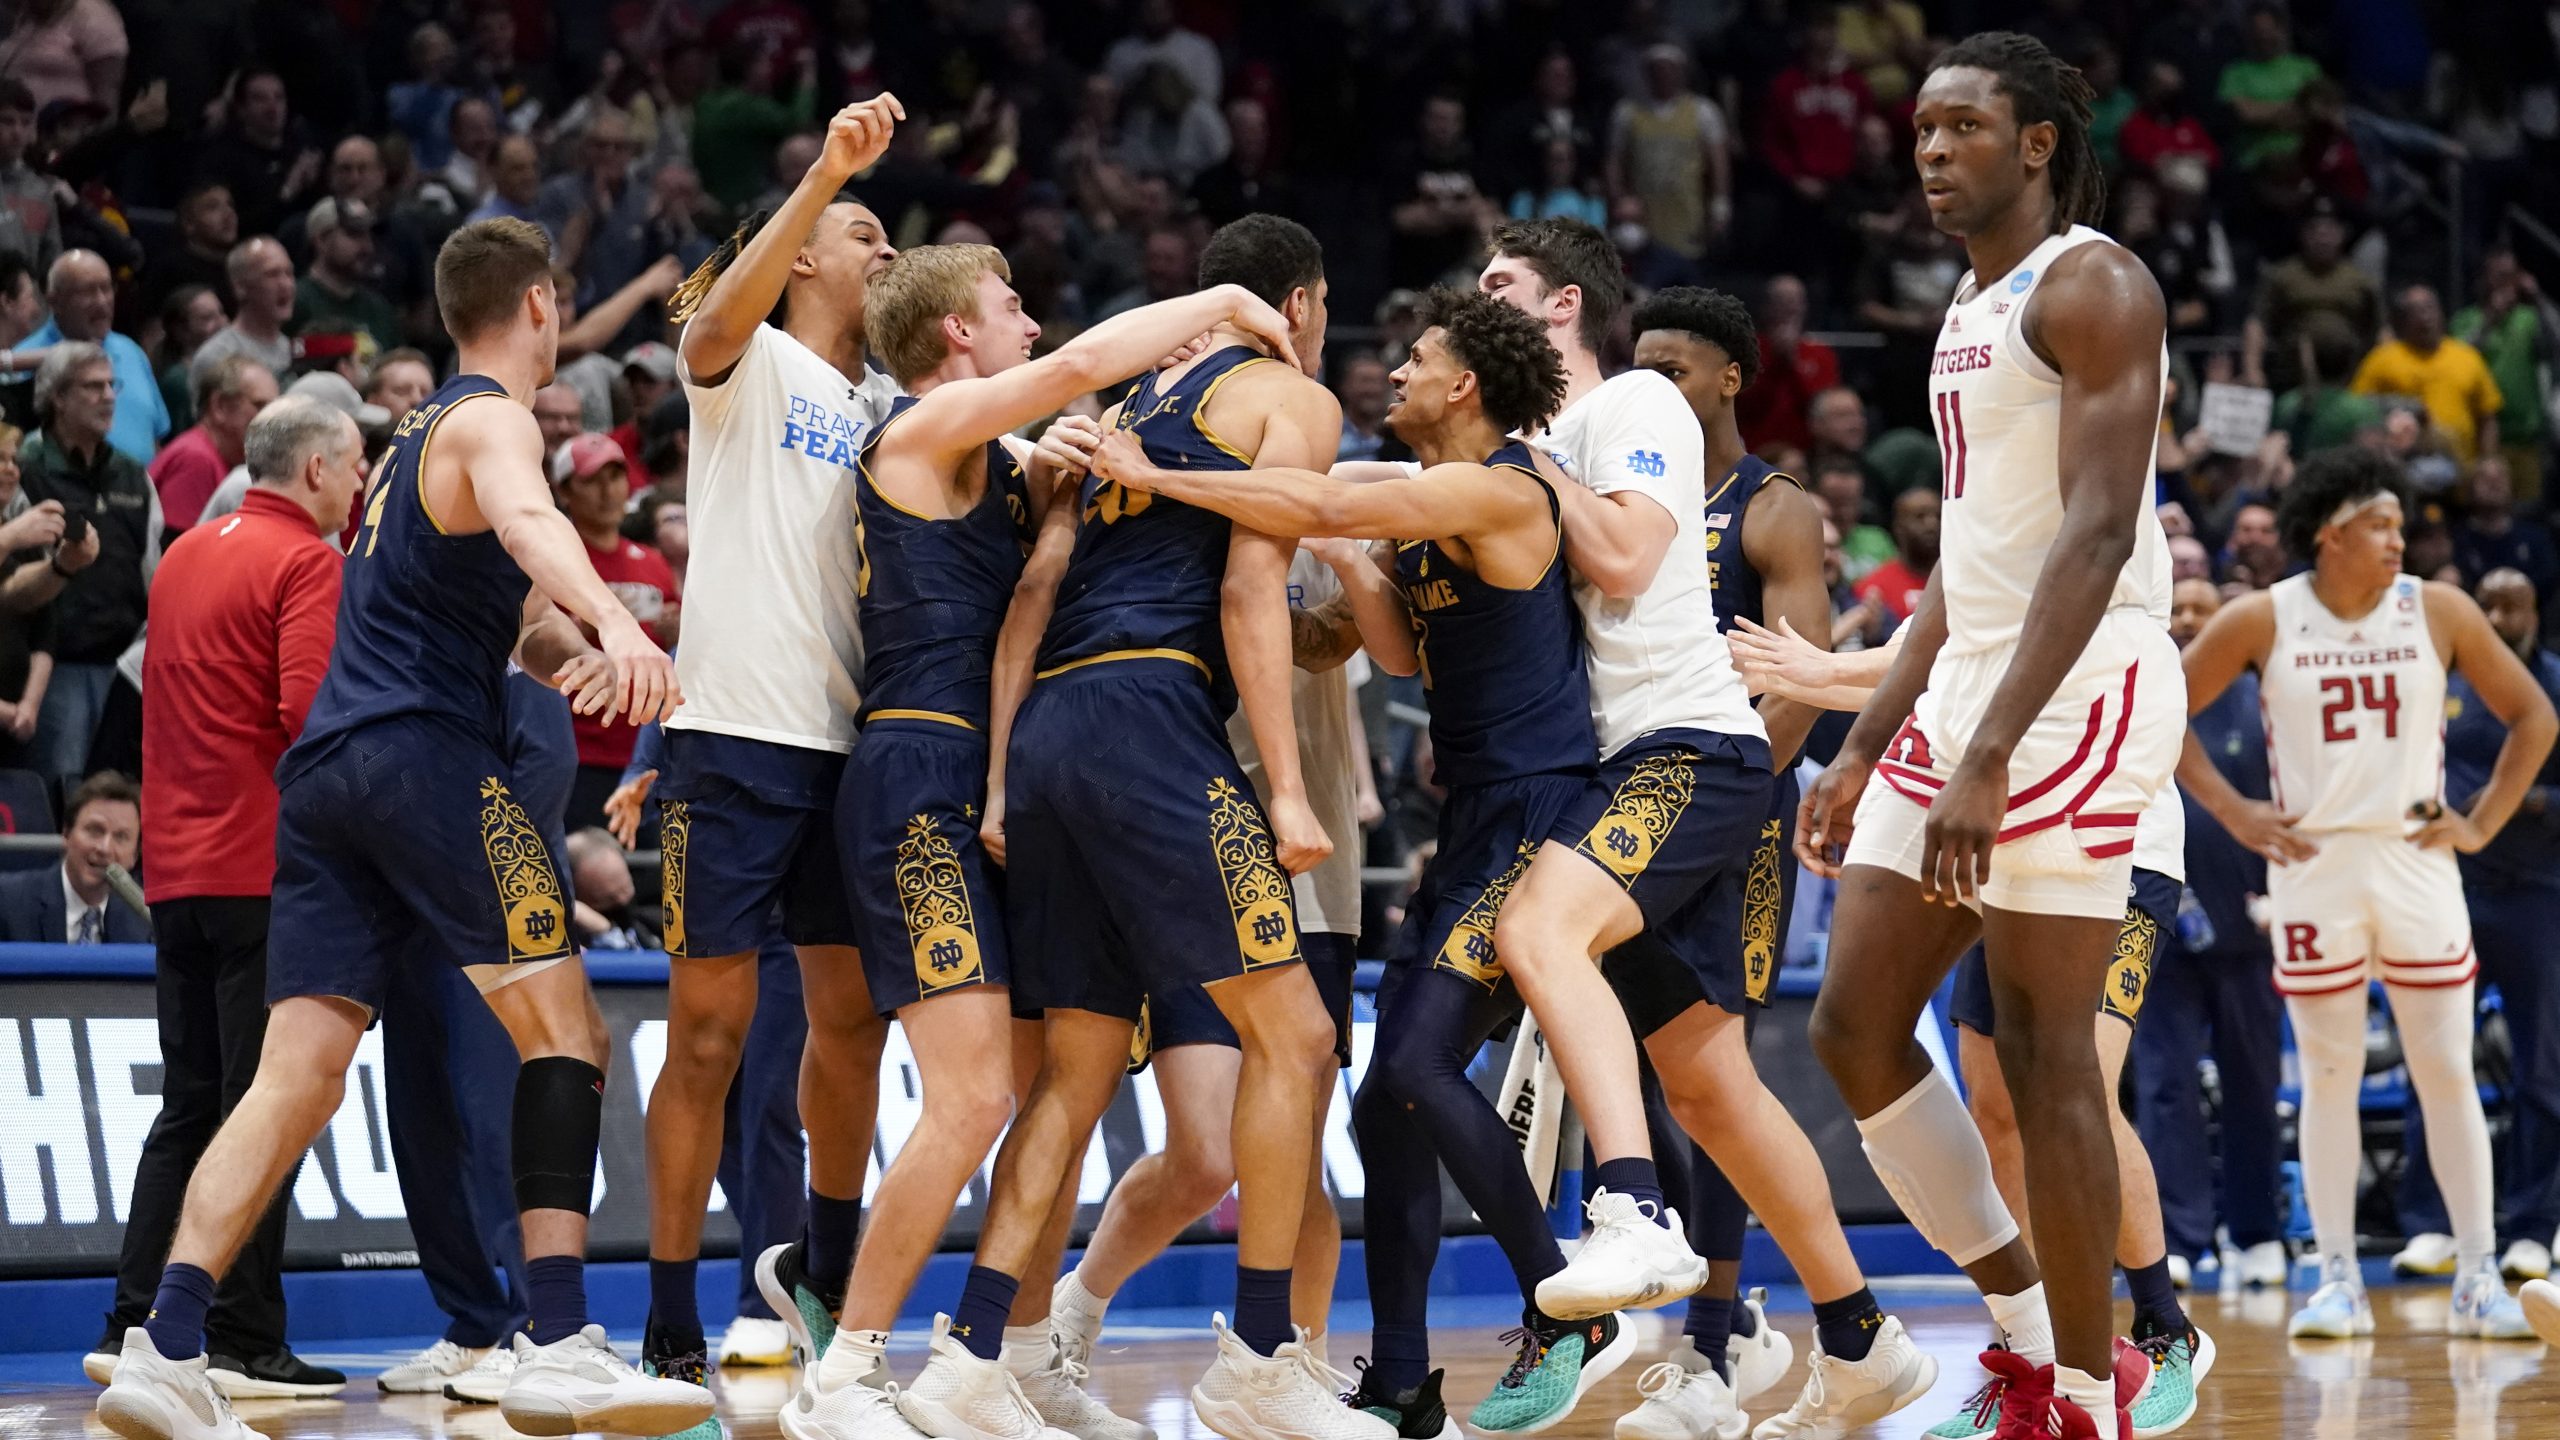 Notre Dame beats Rutgers in double OT to cap First Four